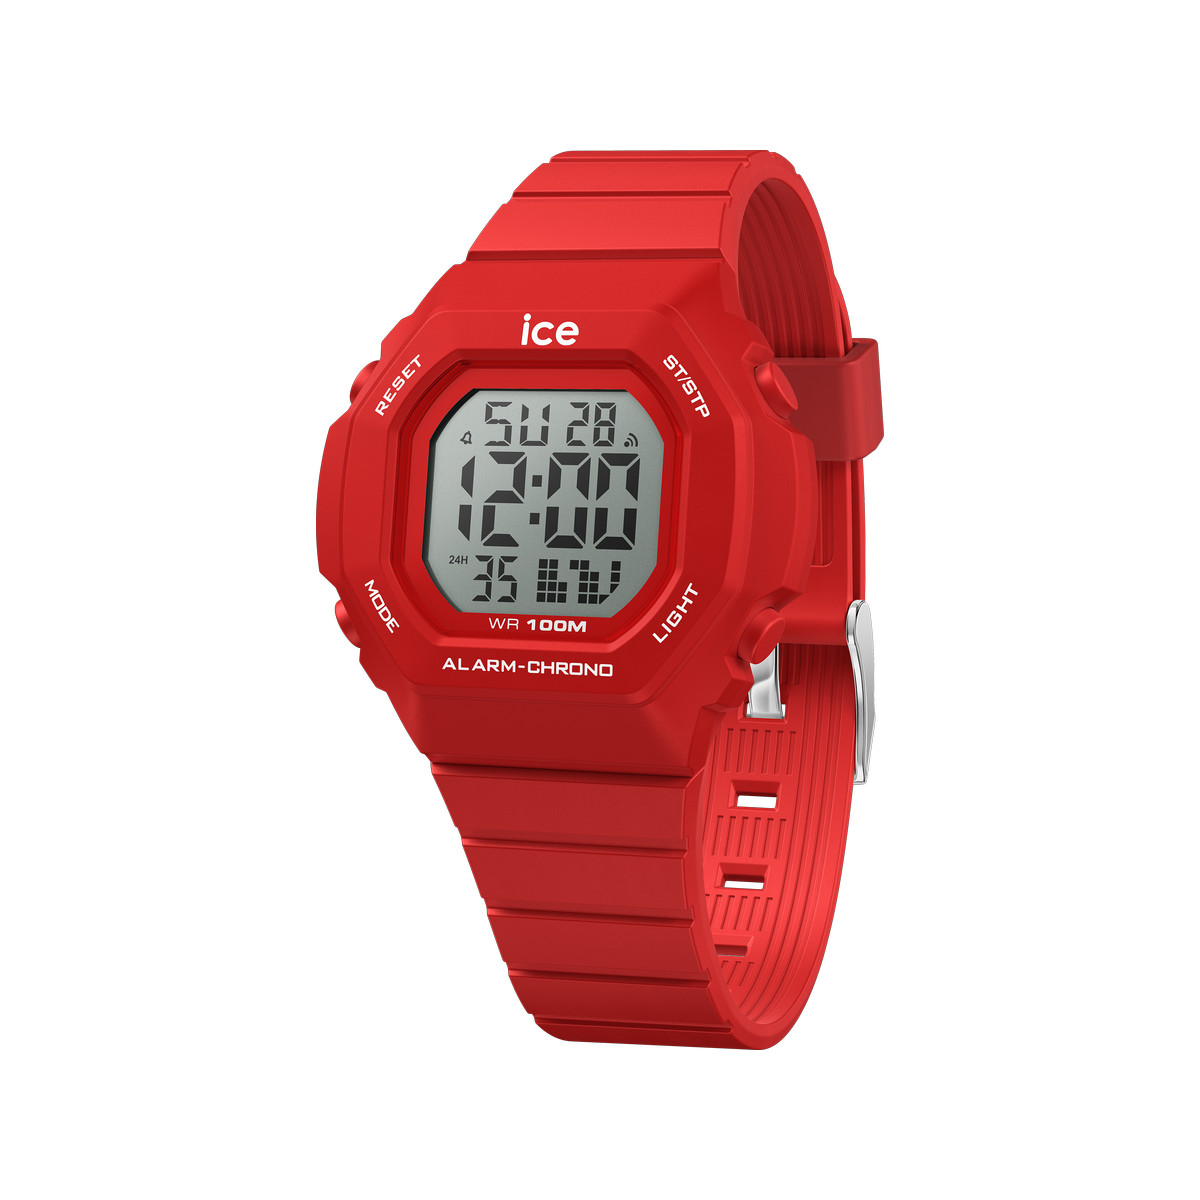 Montre ICE WATCH ice digit ultra femme bracelet silicone rouge